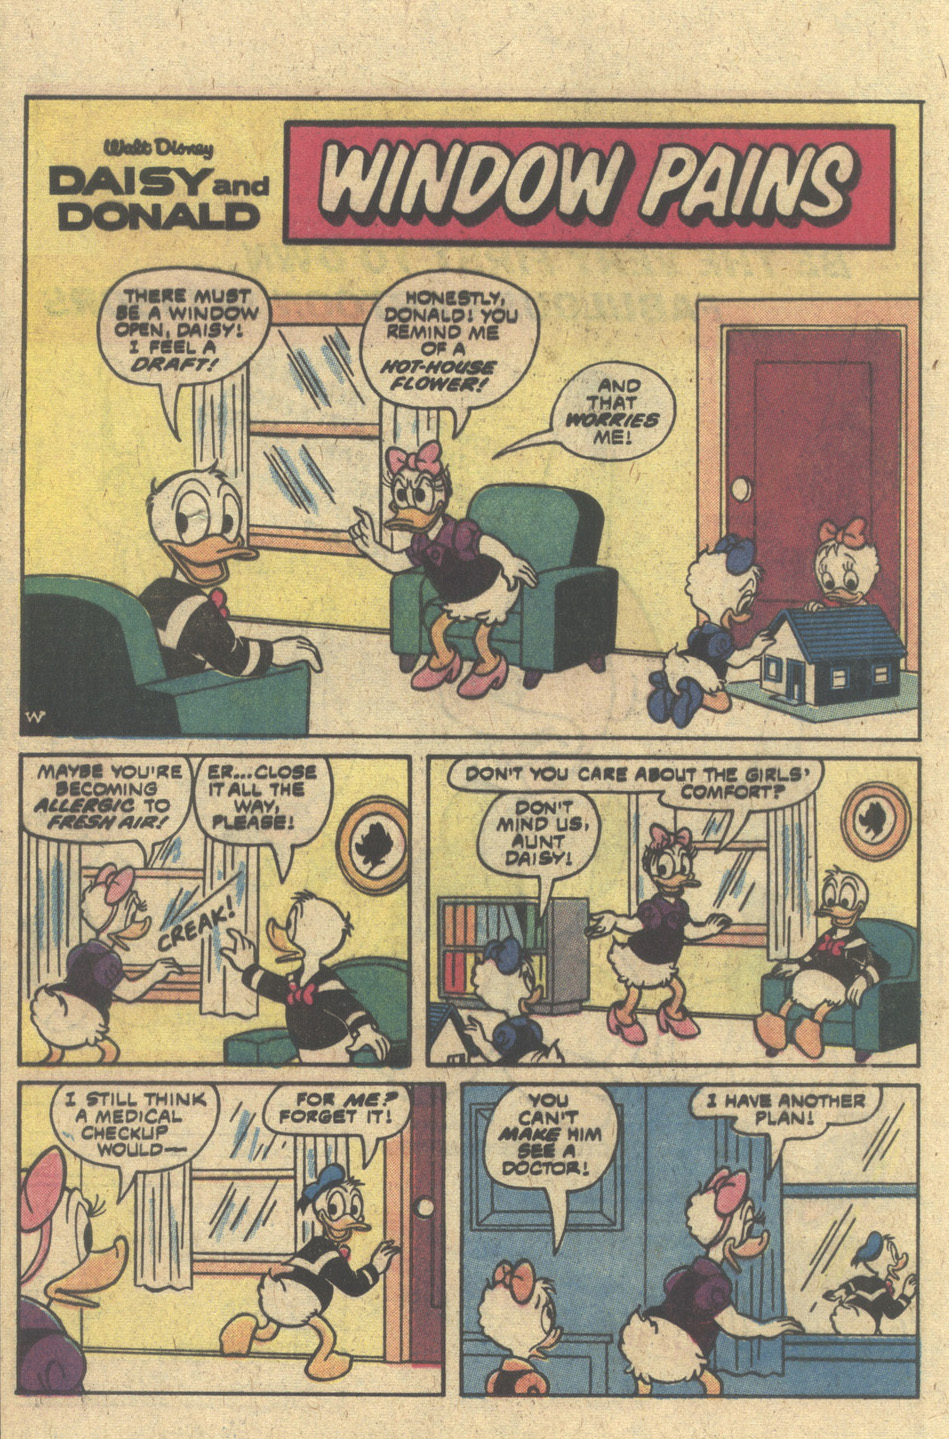 Read online Walt Disney Daisy and Donald comic -  Issue #37 - 24